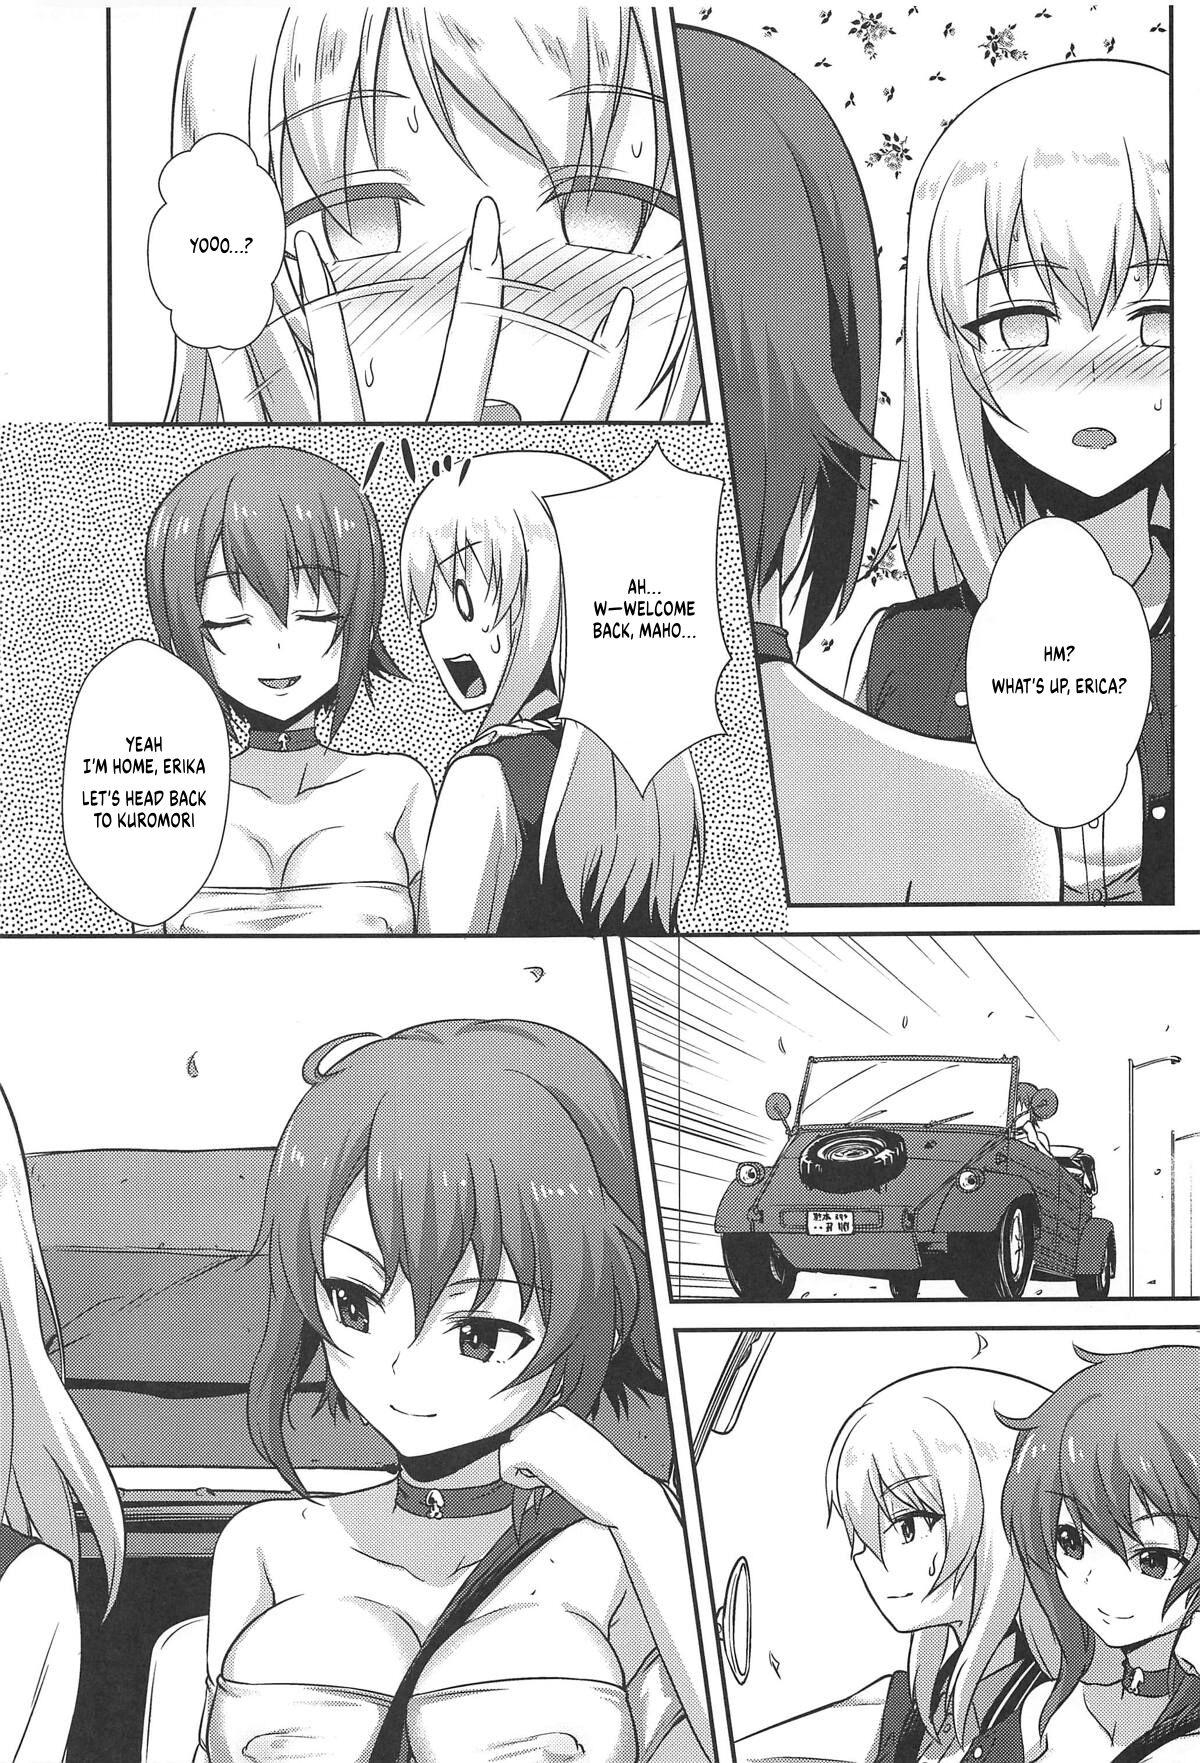 Hardcoresex The Way How a Matriarch is Brought Up - Maho's Case, Bottom - Girls und panzer Sextoys - Page 7